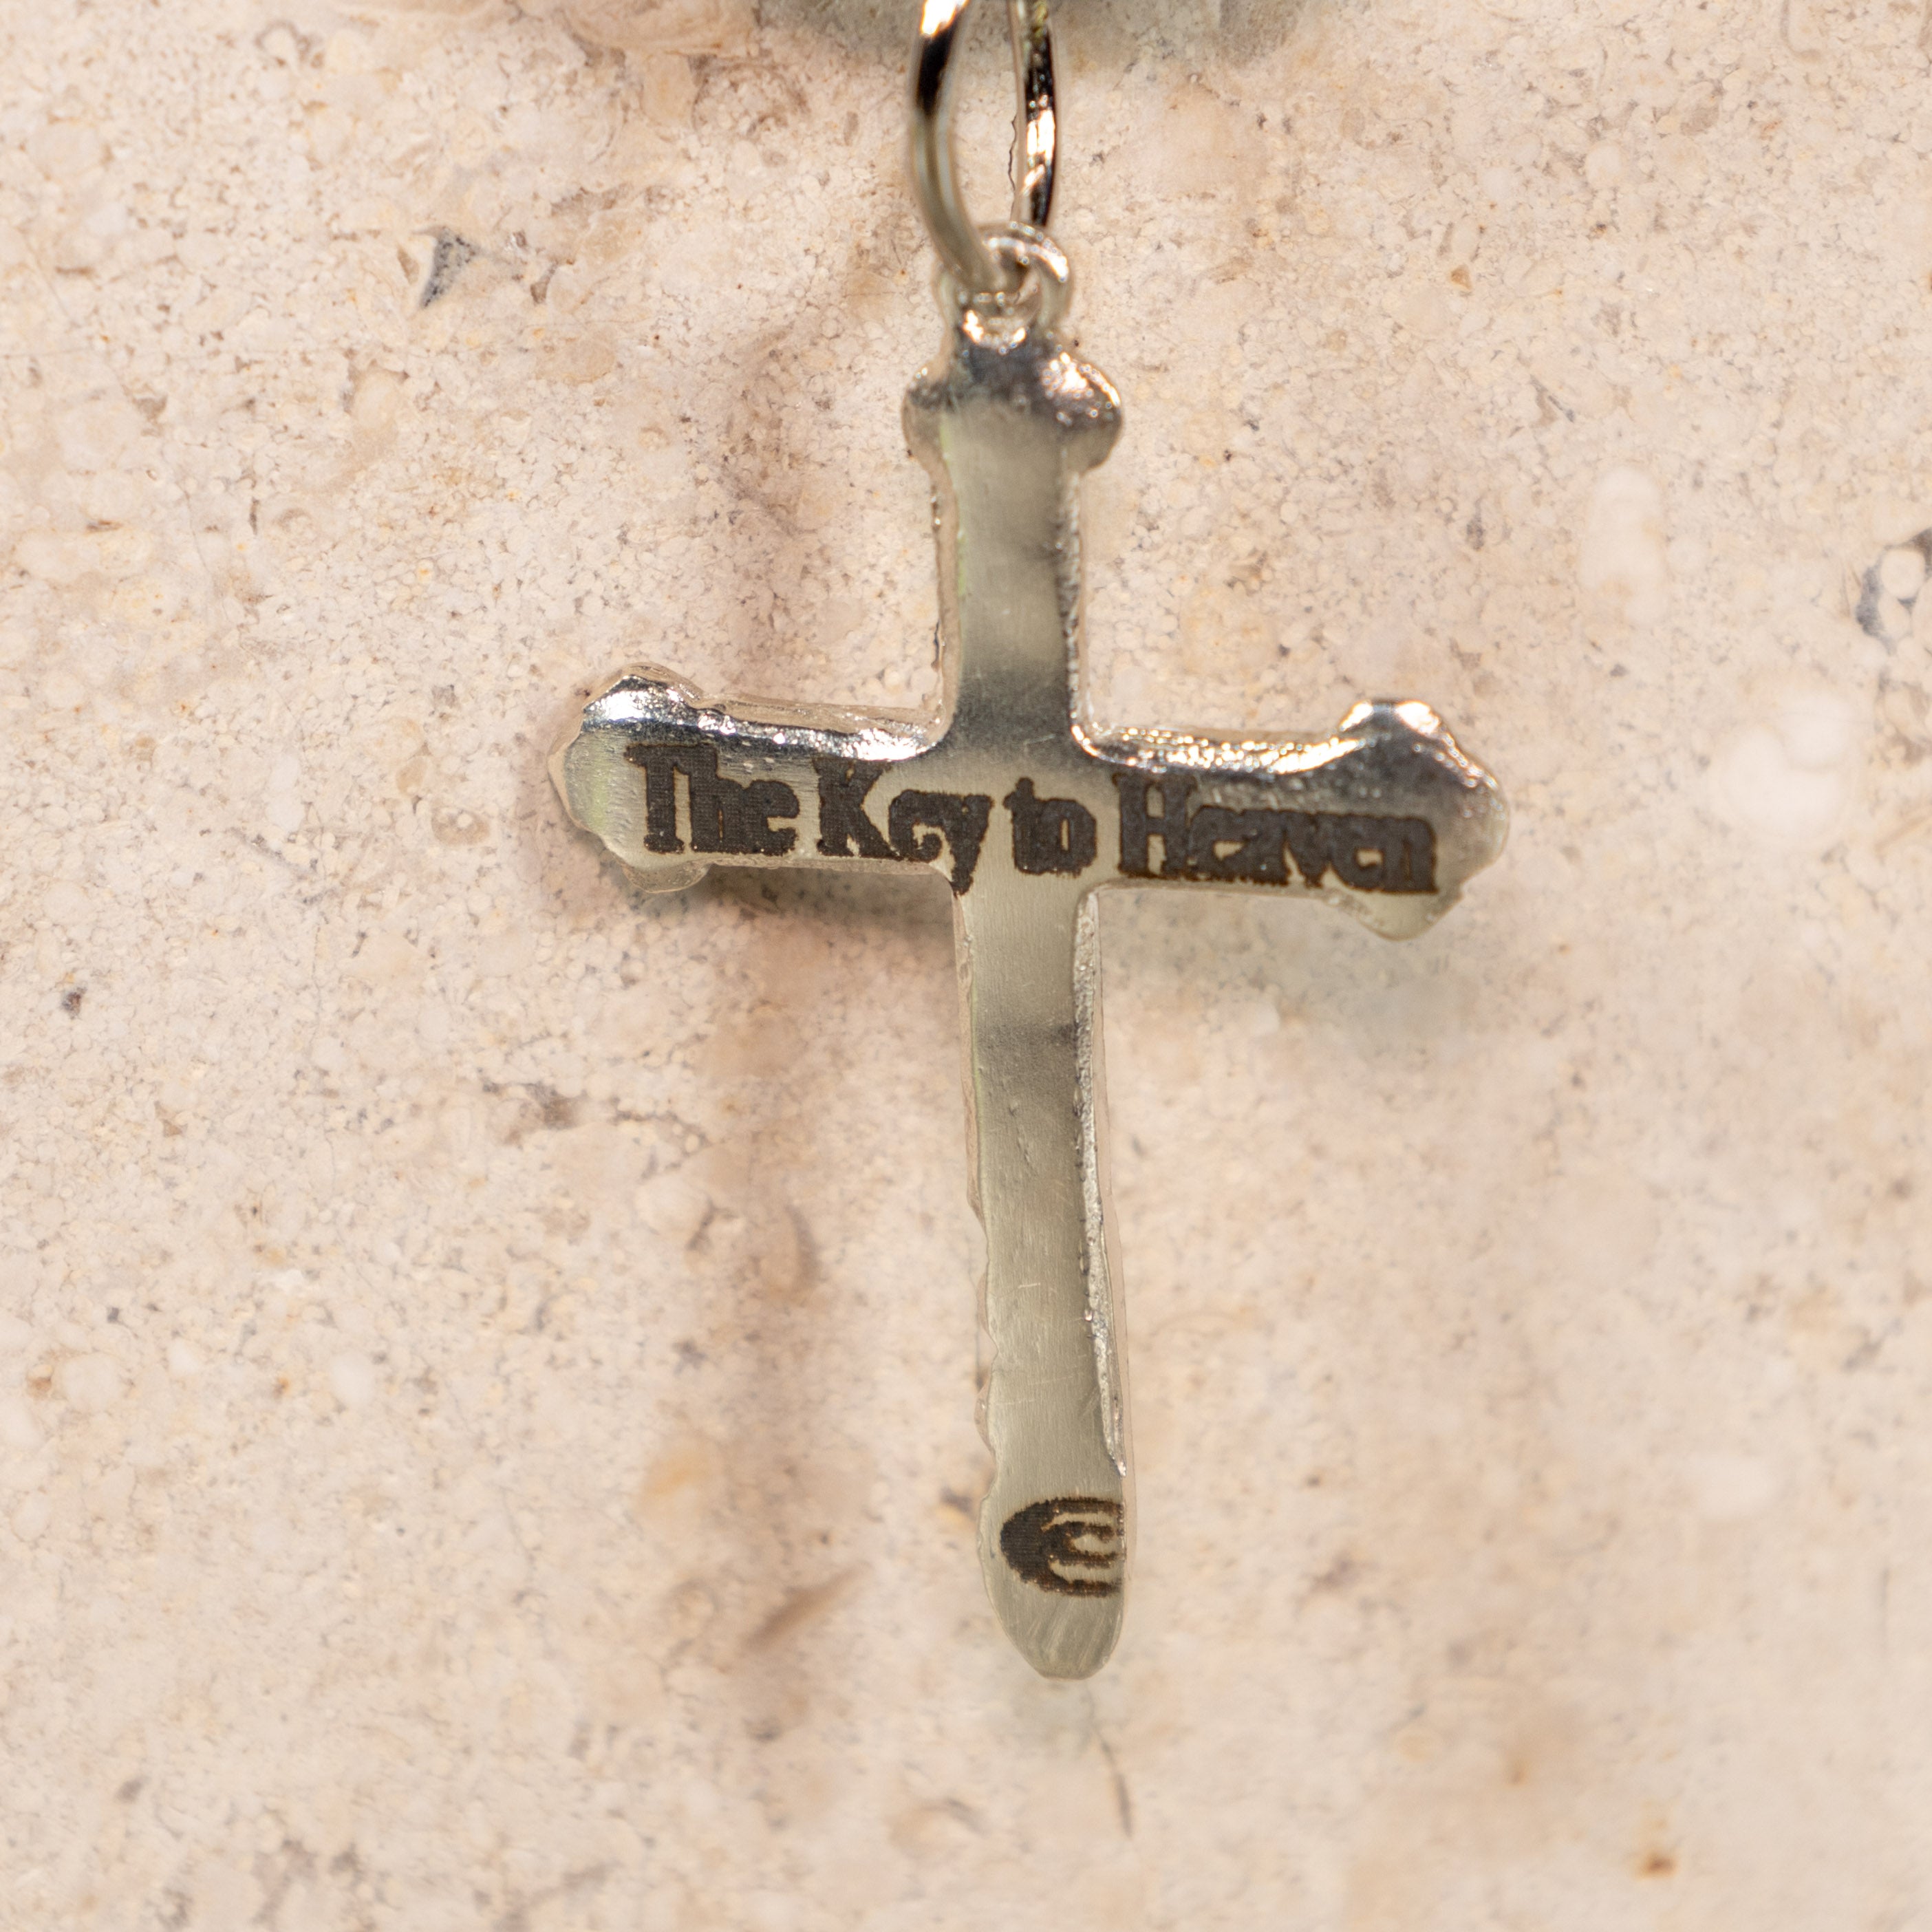 The Key to Heaven Sterling Silver Small Pendant